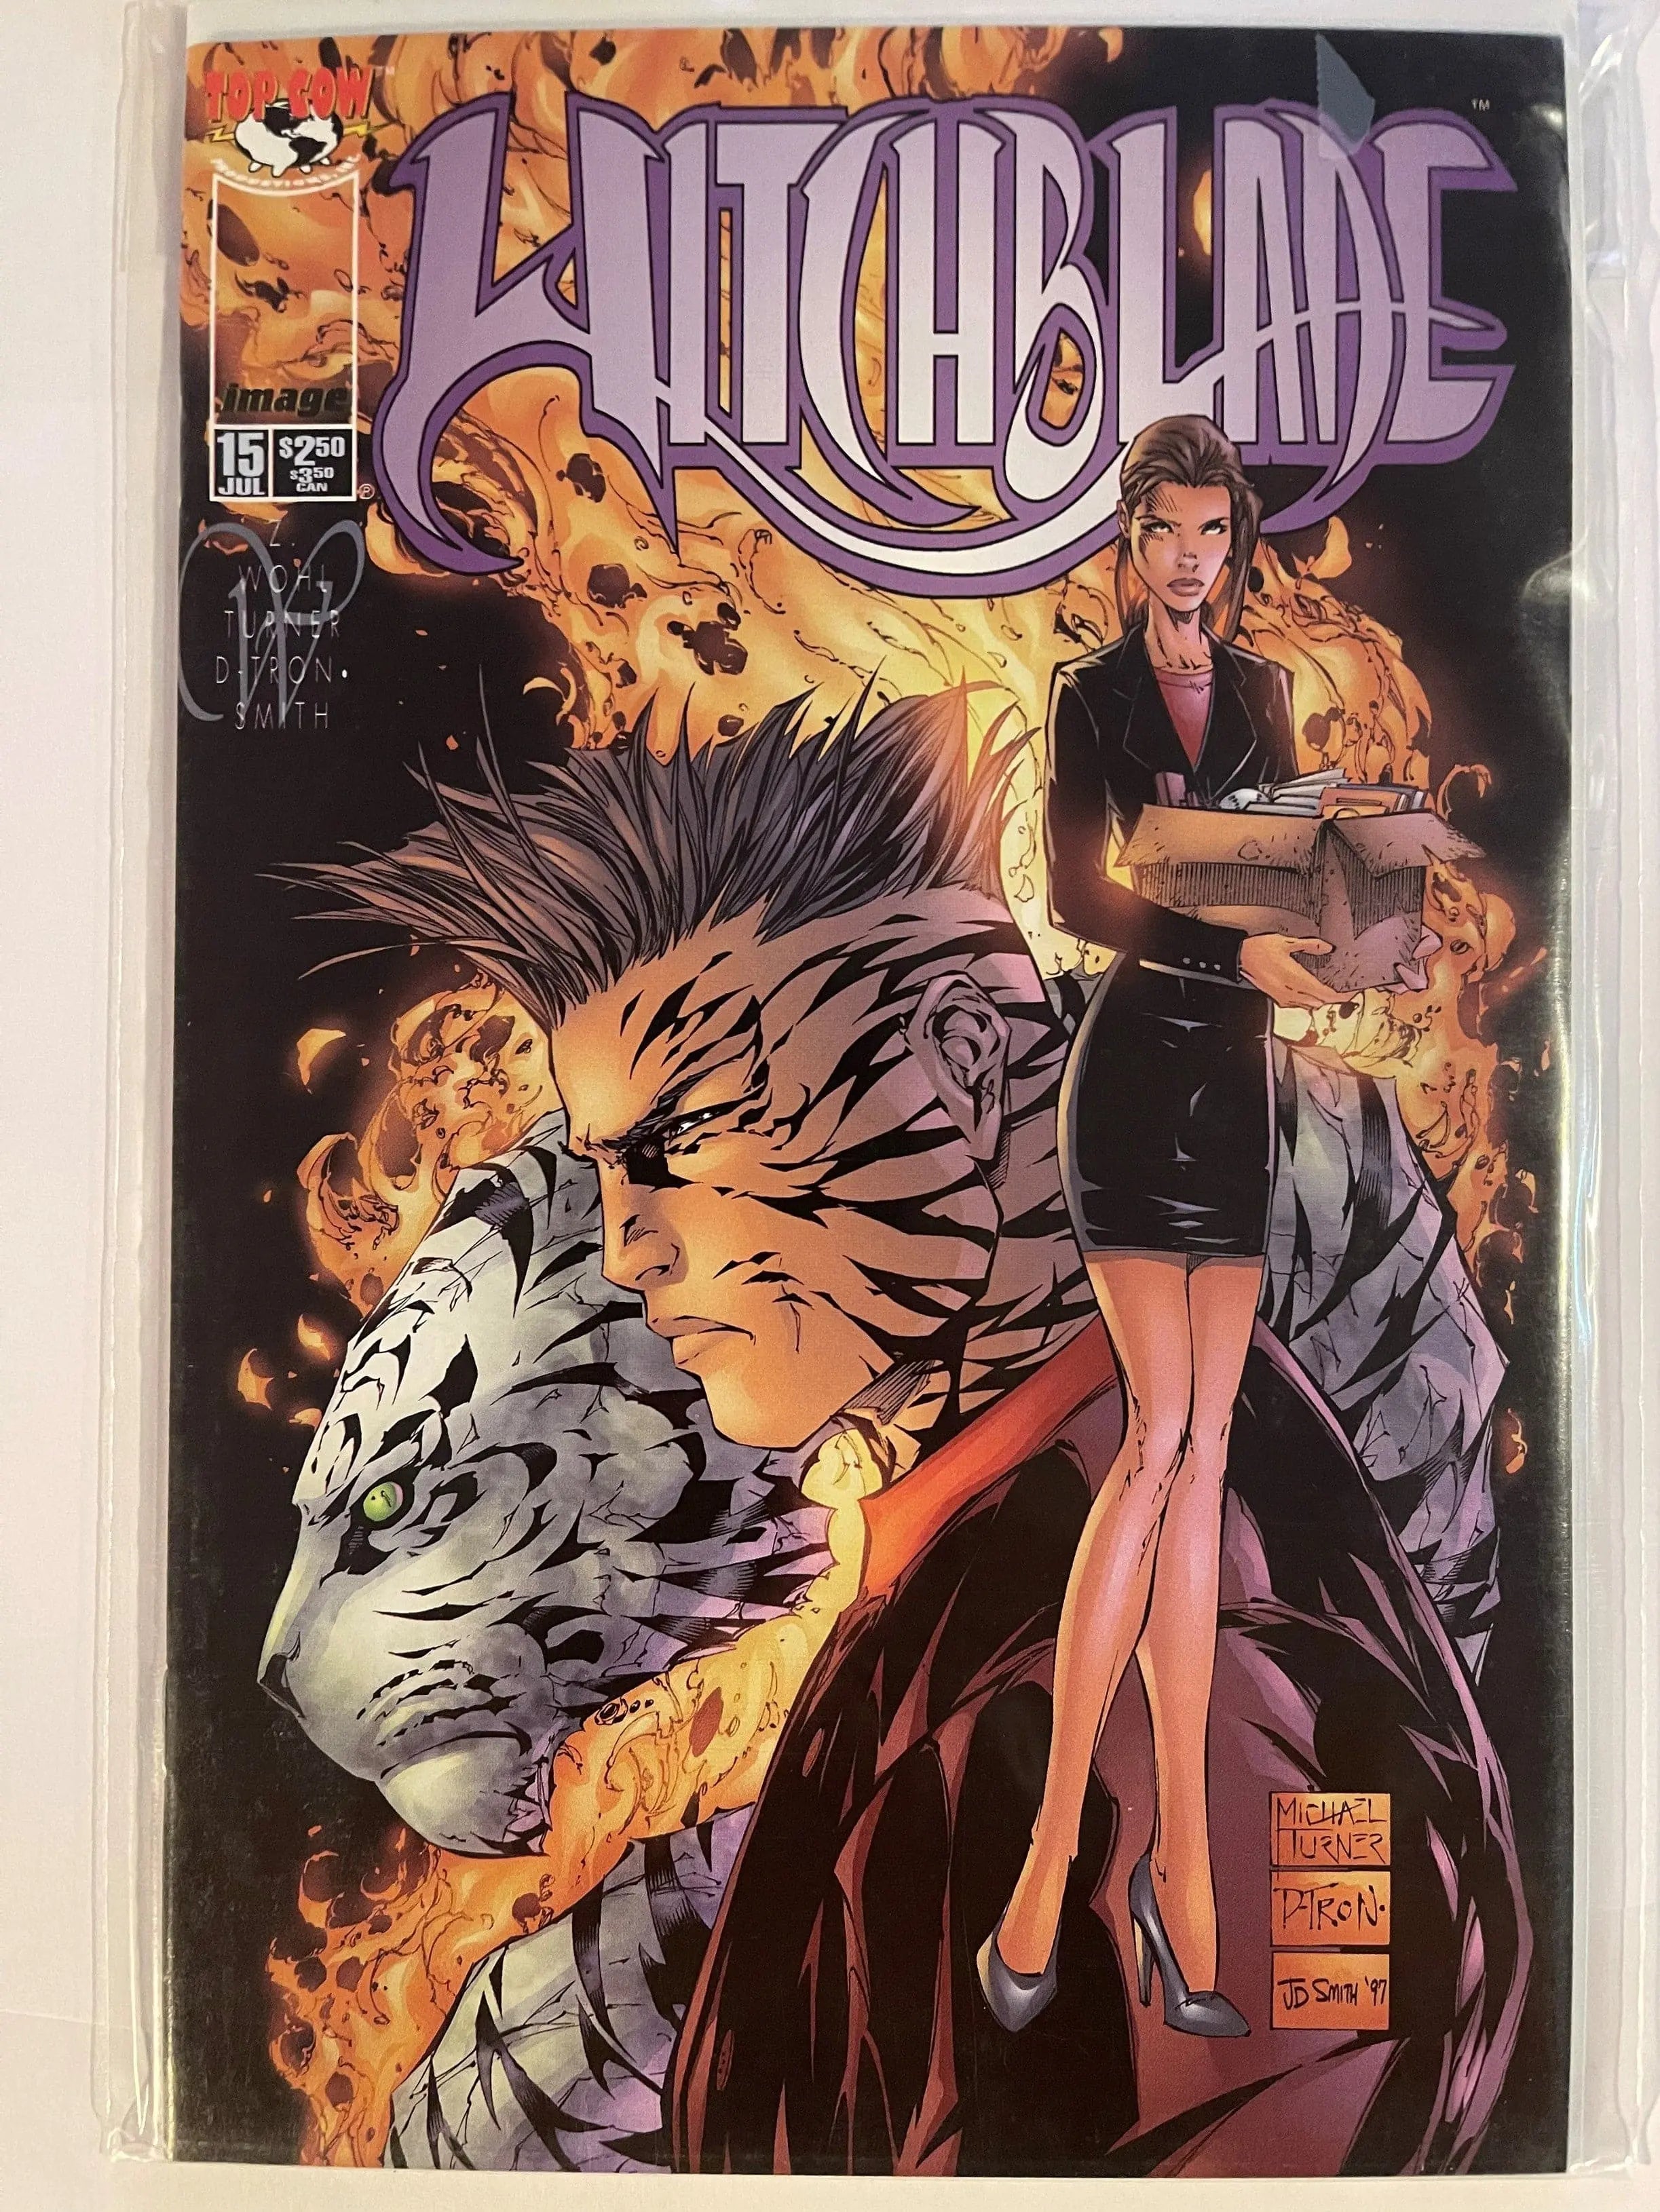 WitchBlade King Gaming Bundle - Used/Collector - Near Mint 9.0 or Above - Set #5 To #16 - #21 To #24 King Gaming